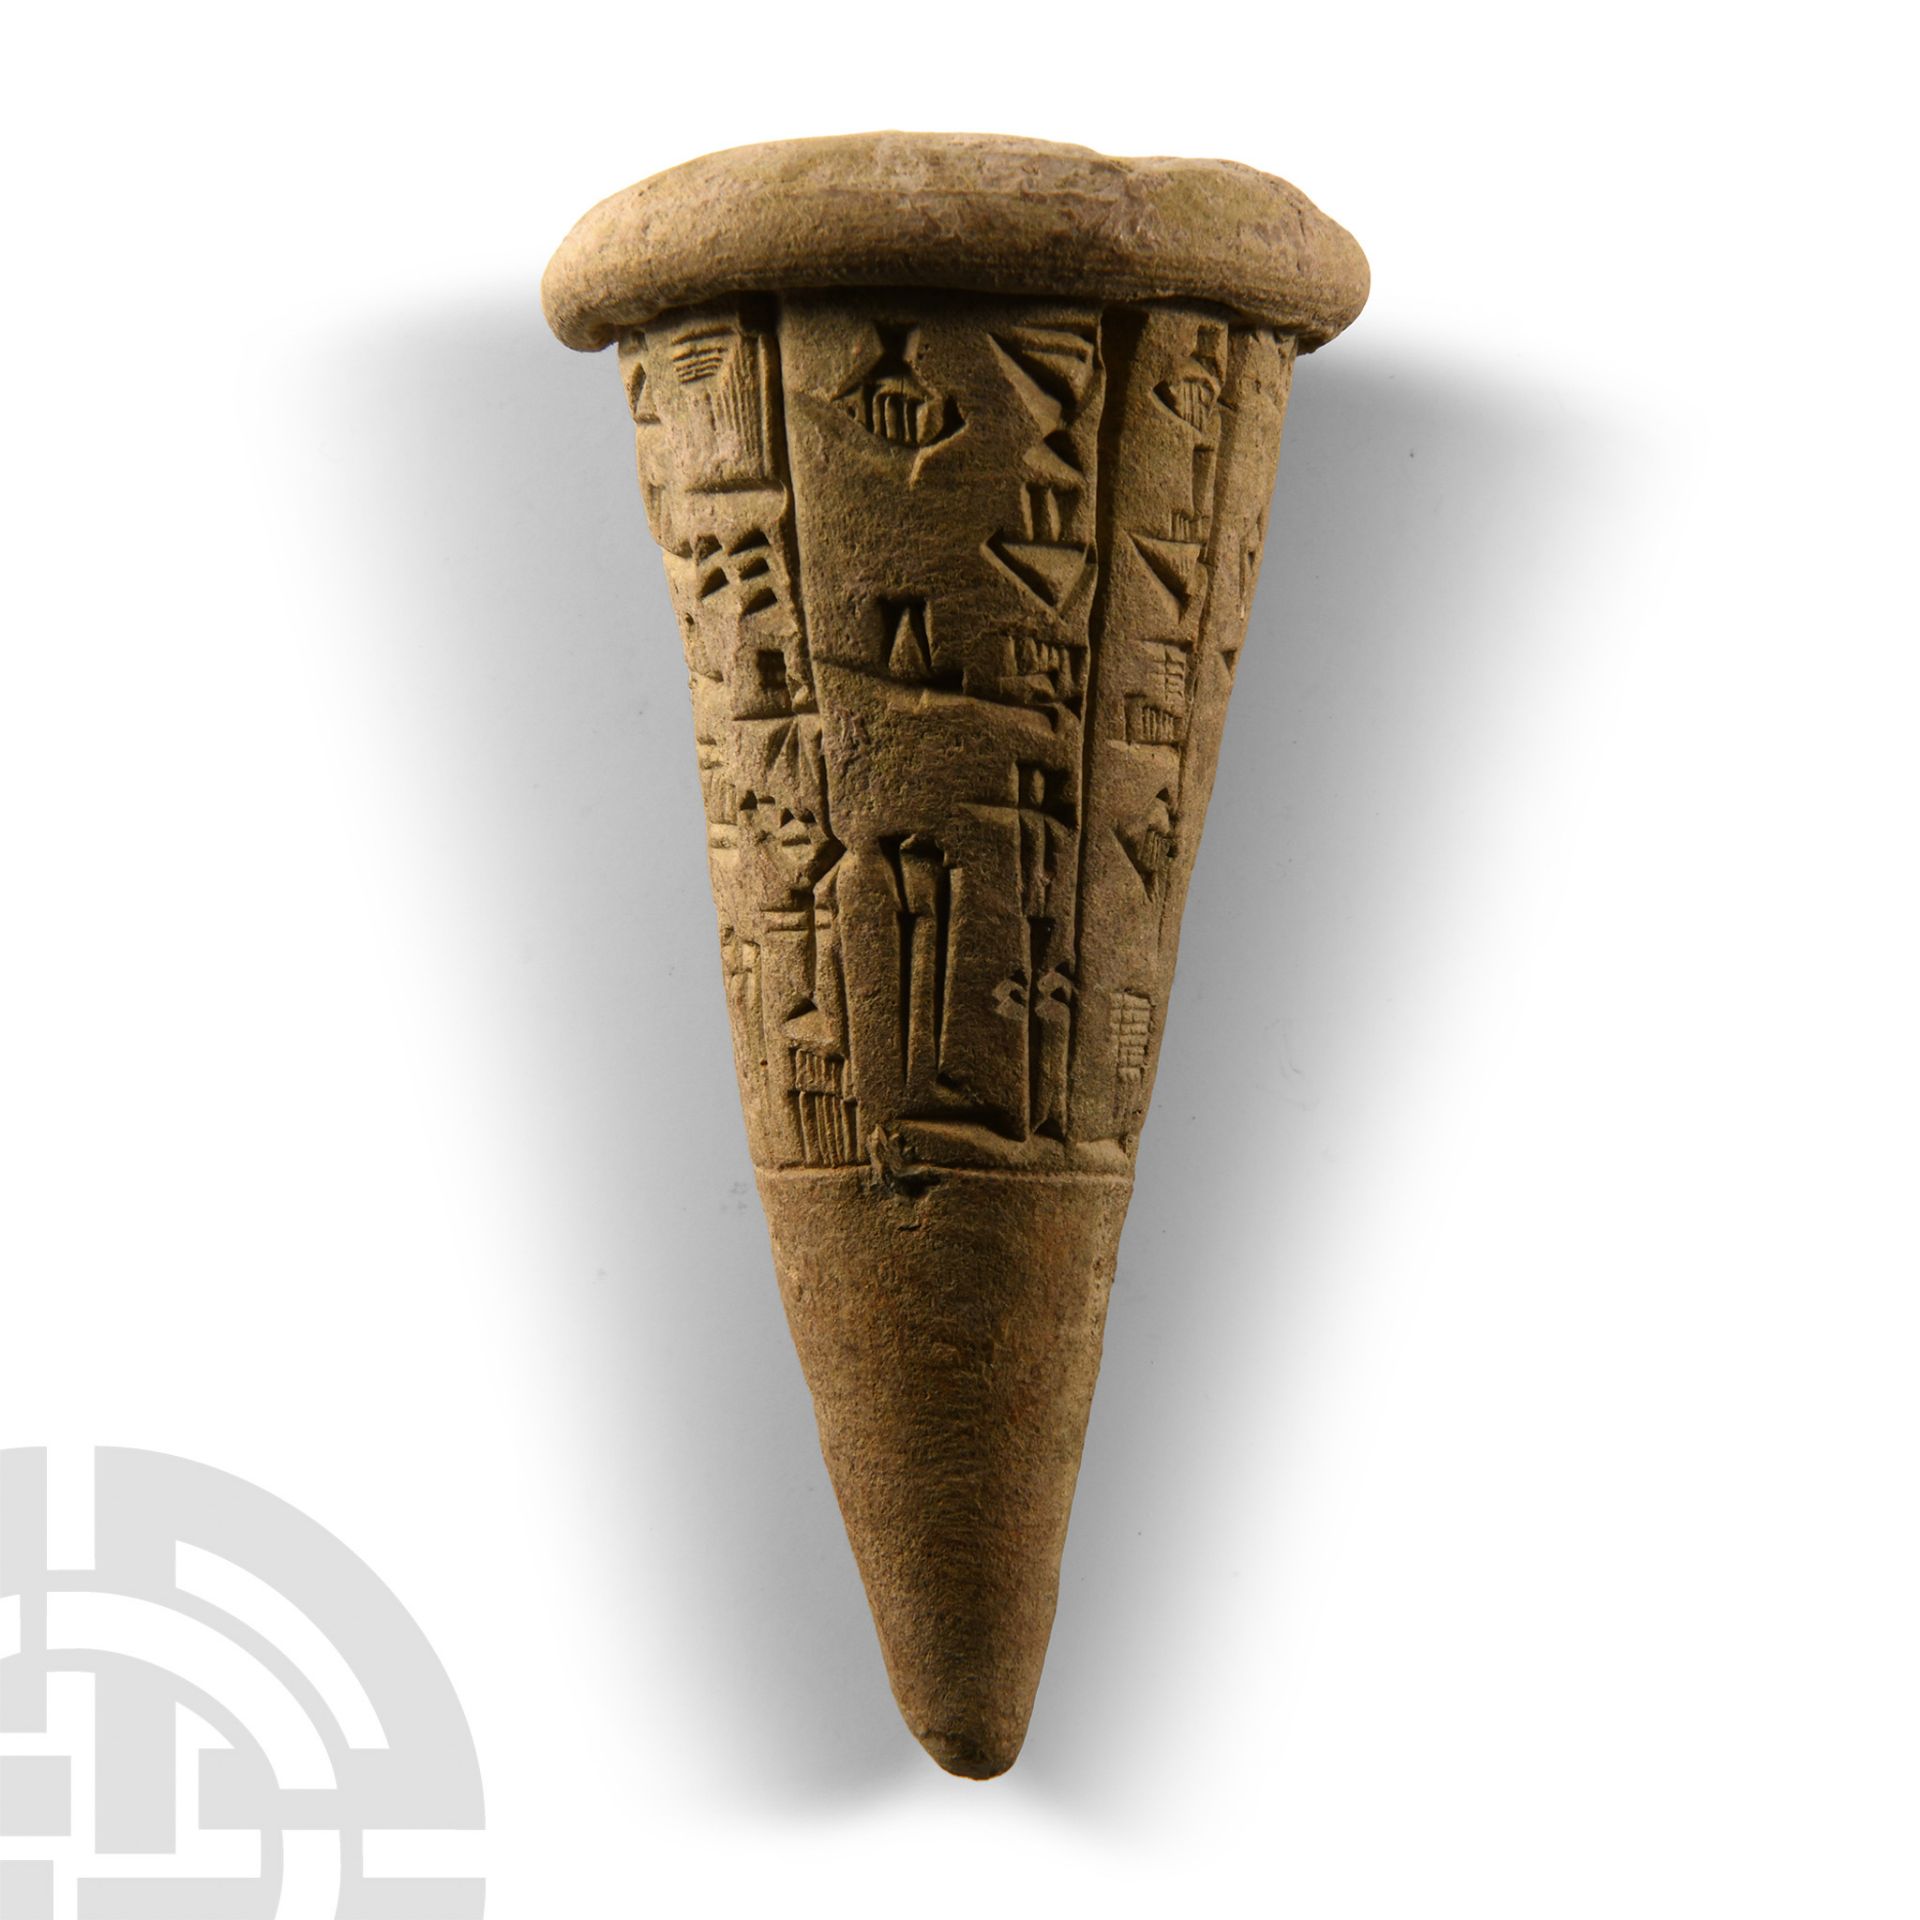 Sumerian Cuneiform Foundation Cone from Lagash During the Reign of Gudea - Image 2 of 4